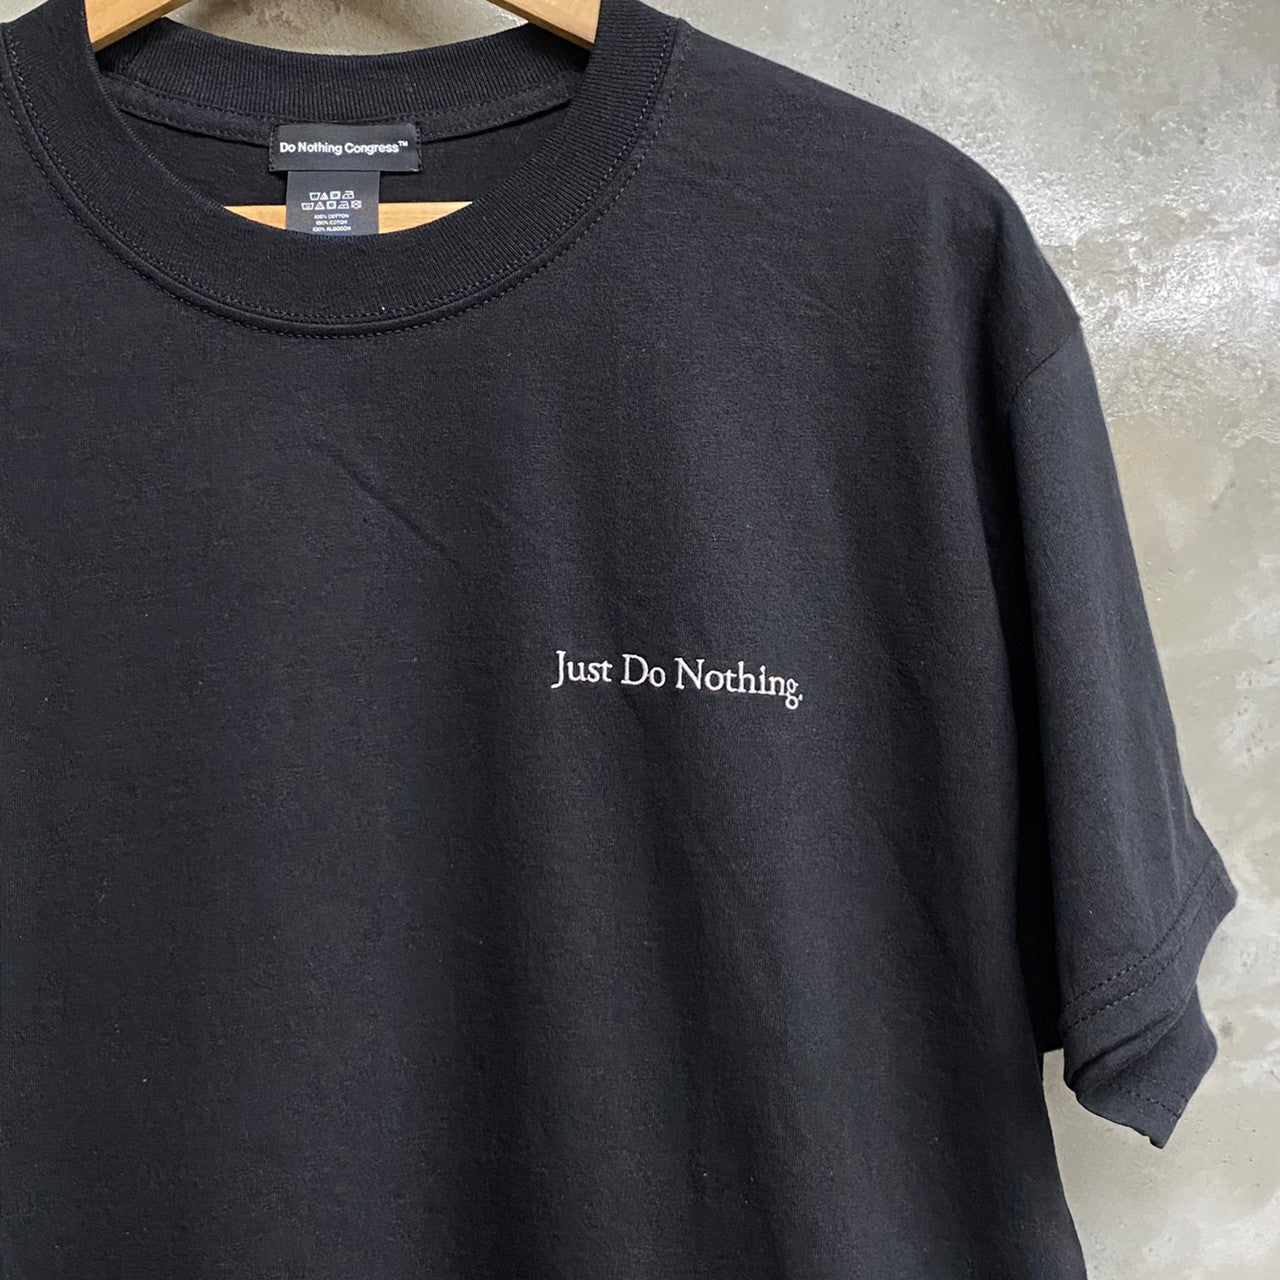 Do Nothing Congress " Just Do Nothing EMBR " T-SHIRTS / Do Nothing Congress